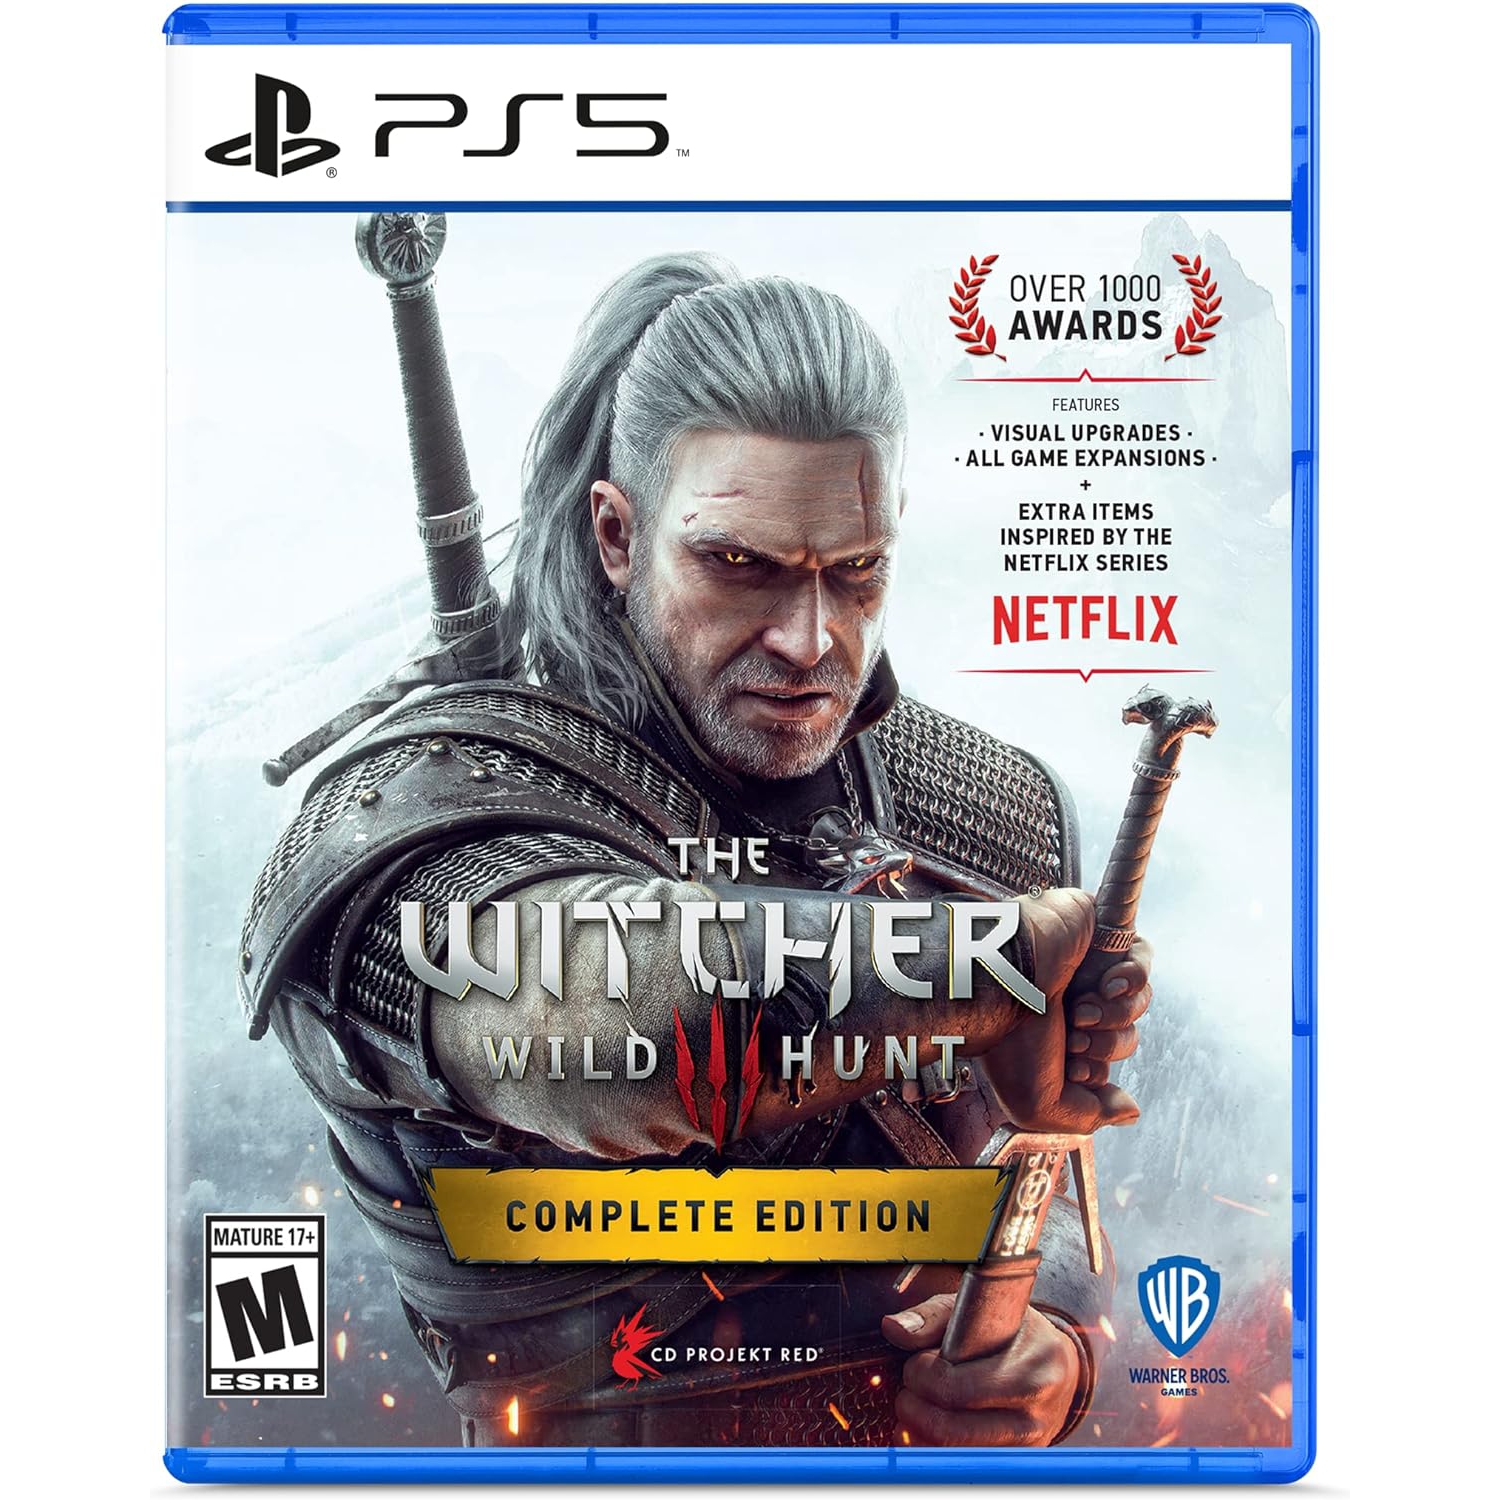 The Witcher 3 Wild Hunt - Complete Edition Playstation 5